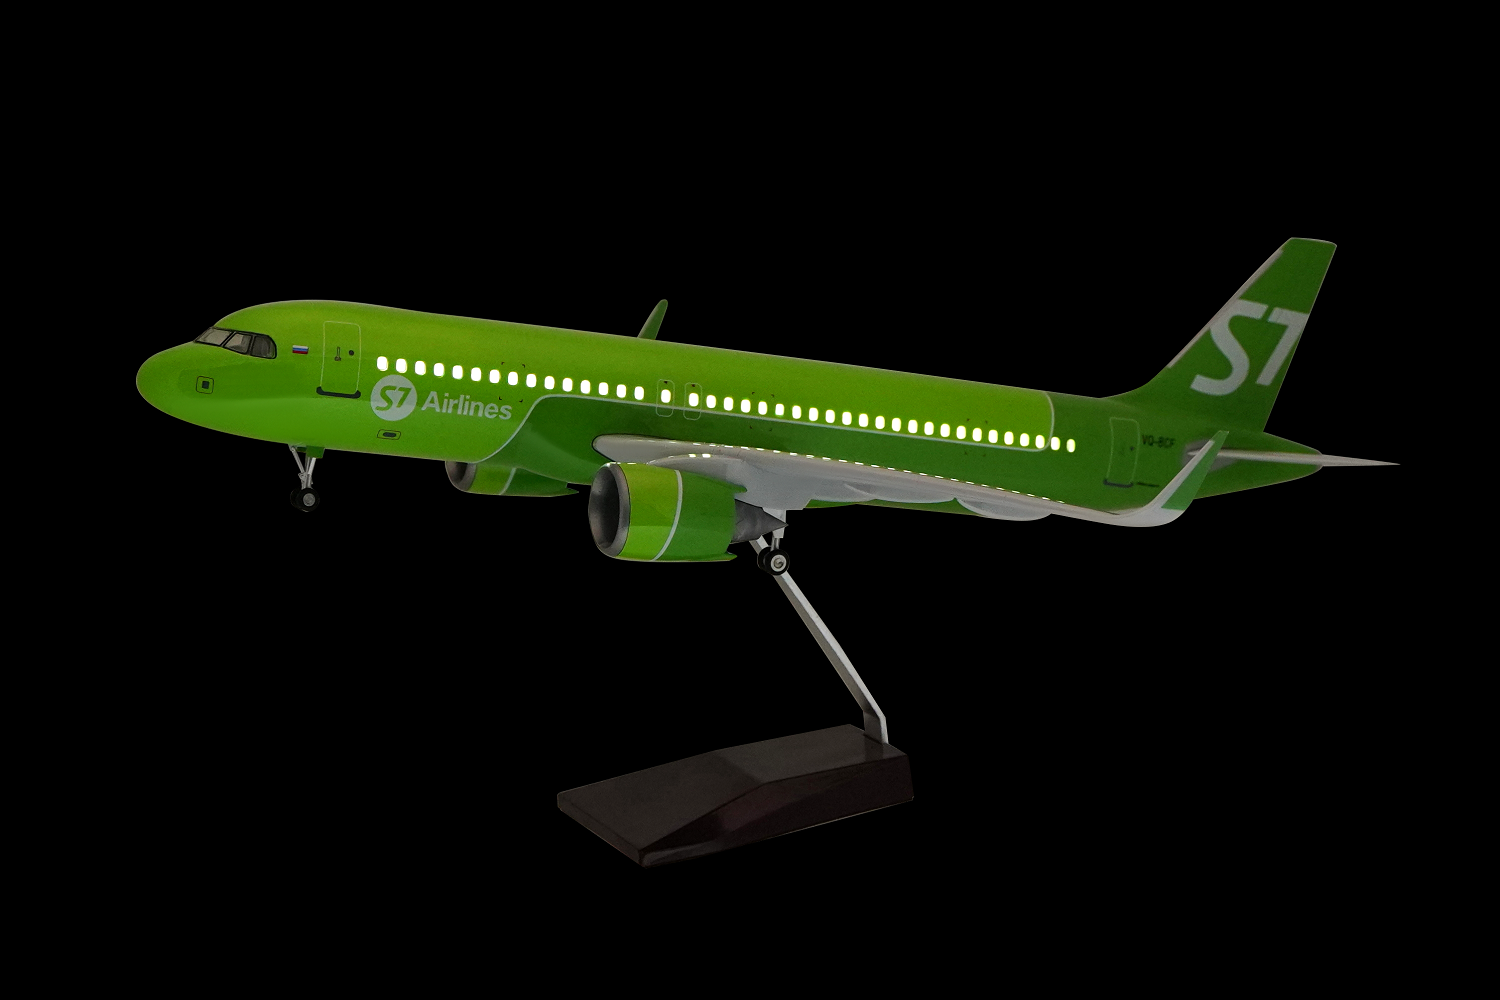   Airbus A320 Neo,  S7 Airlines .    .  # 18 hobbyplus.ru